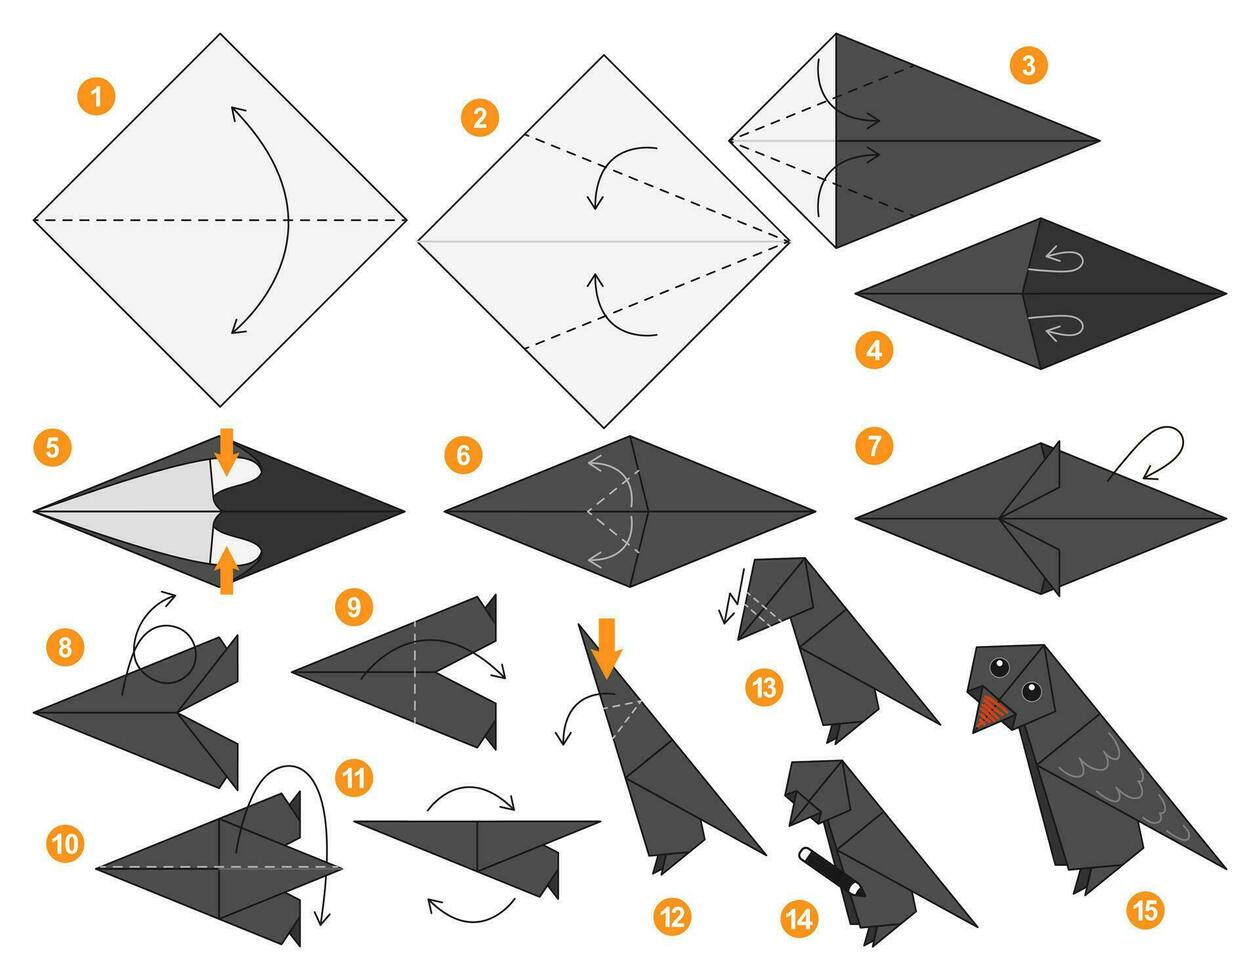 Bird origami scheme tutorial moving model. Origami for kids. Step by step how to make a cute origami crow. Vector illustration.